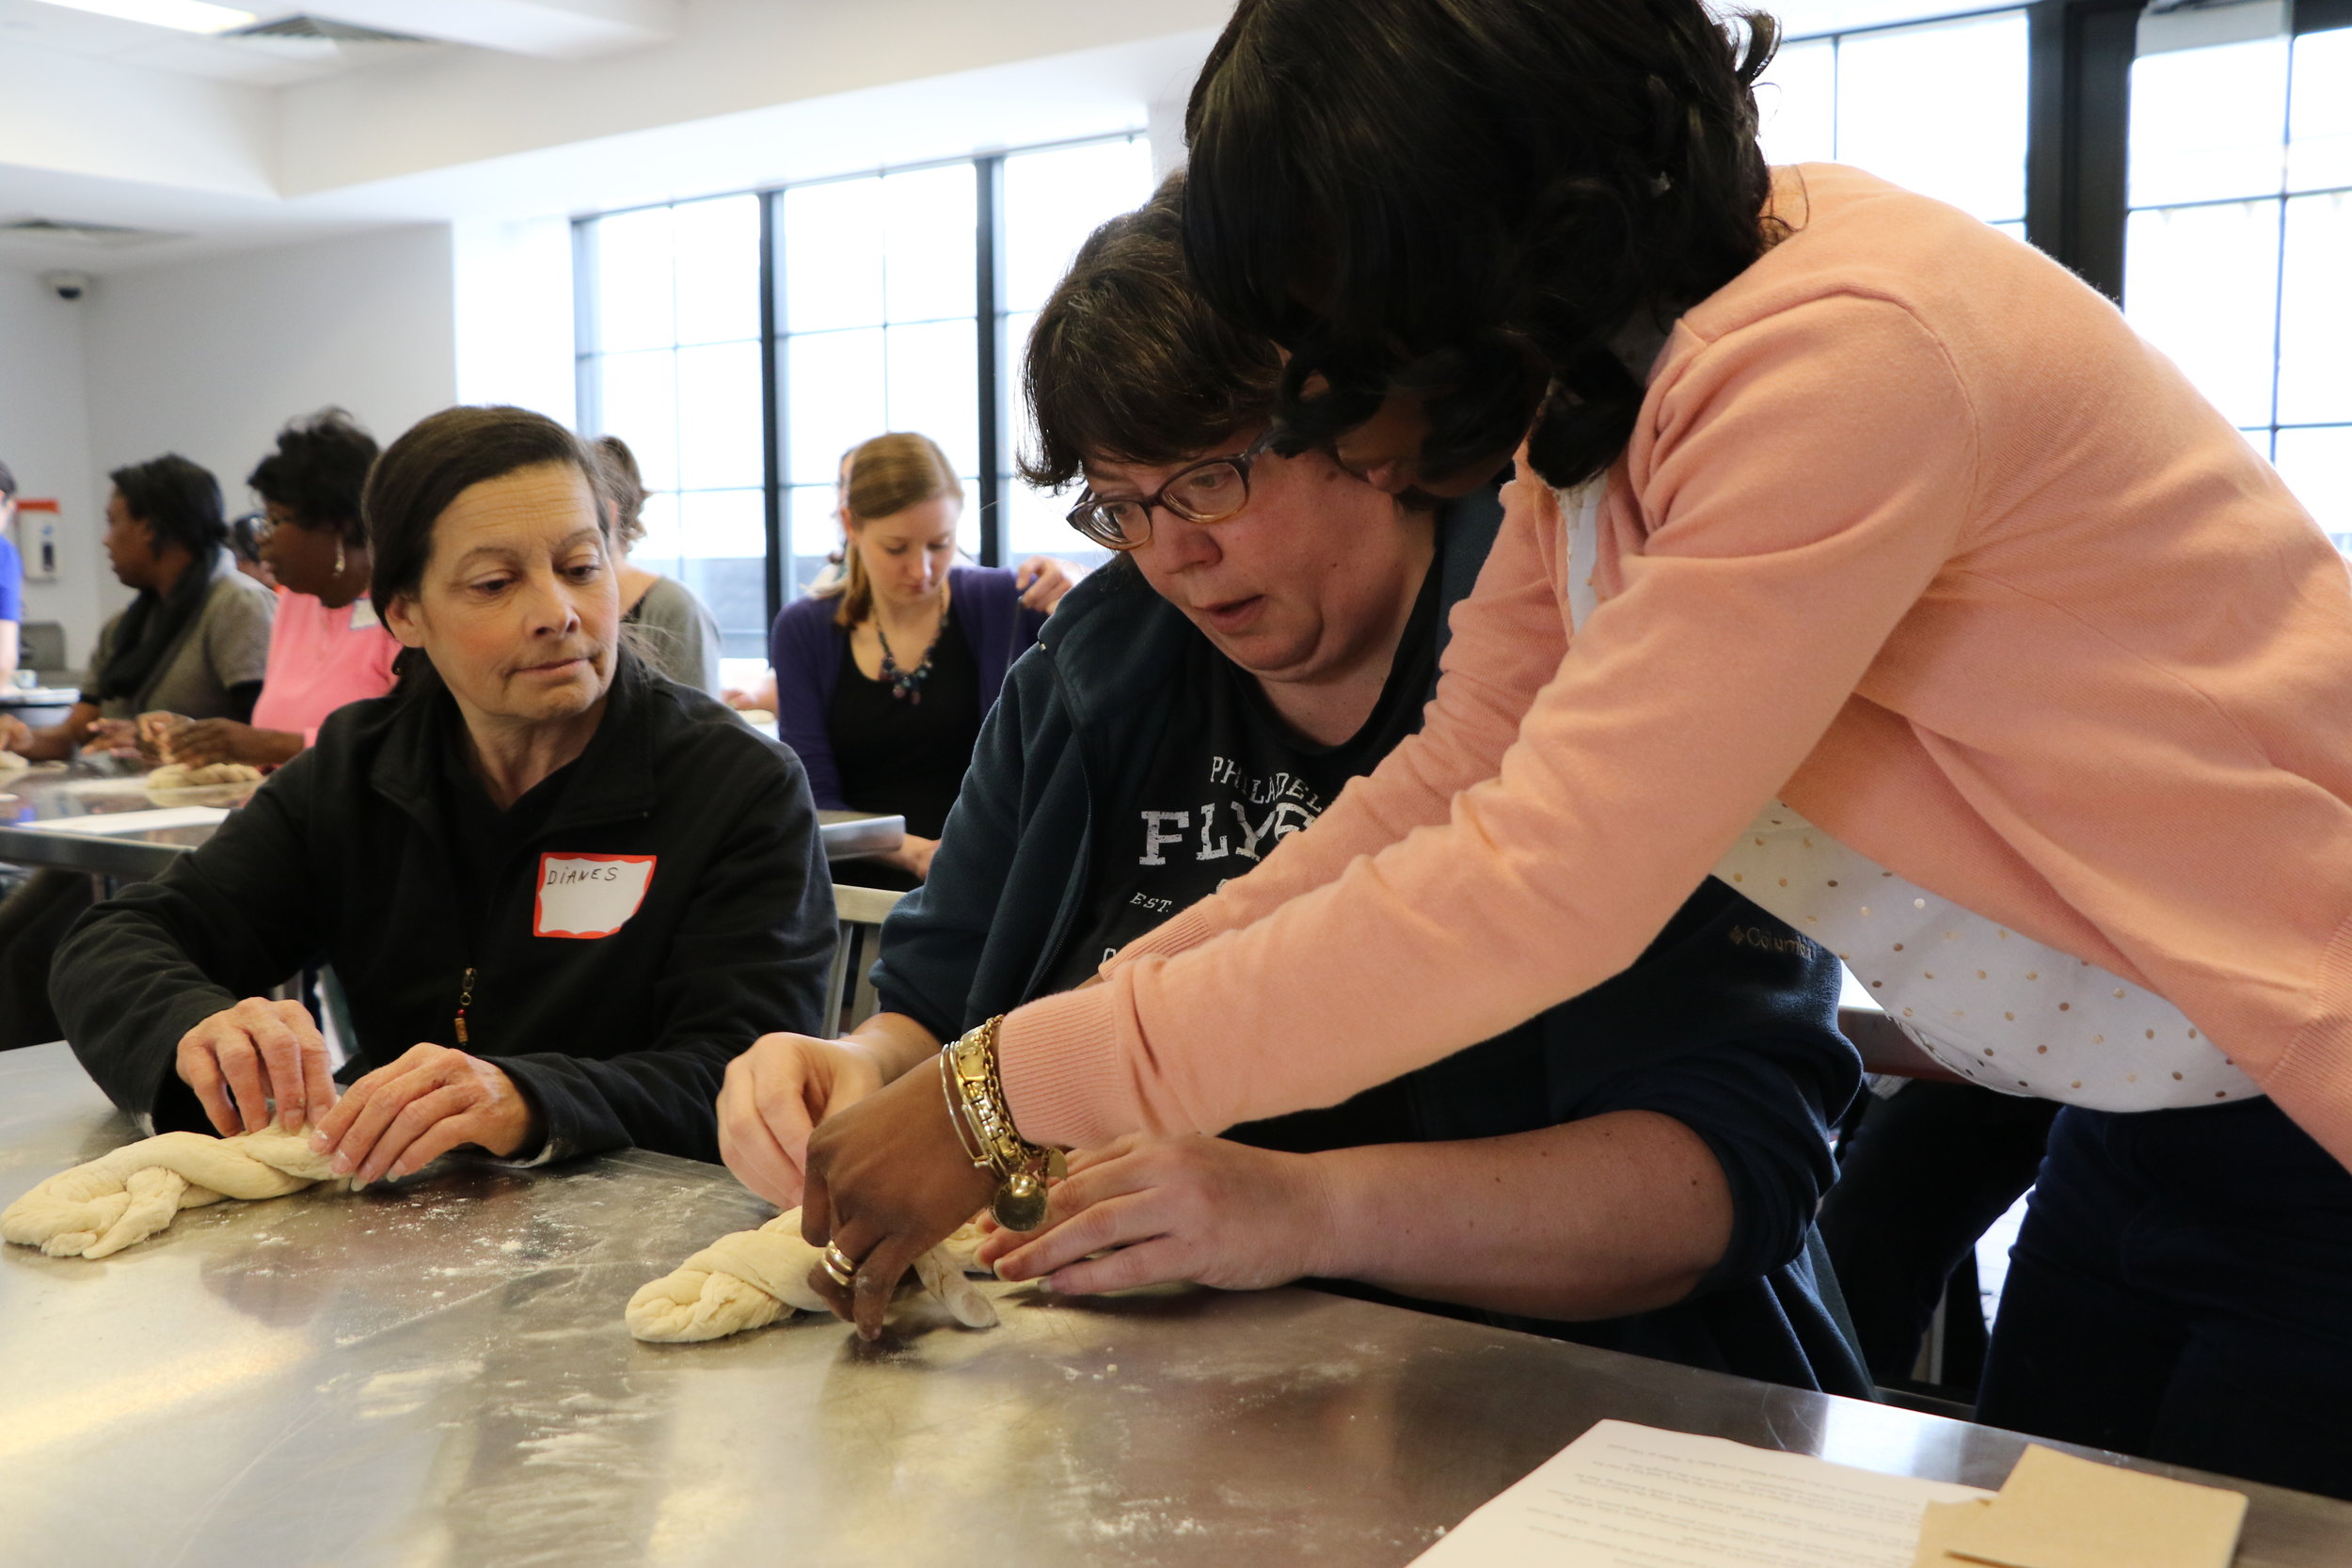 Alt text: three women work together at a stainless steel table to knead dough into a braid.